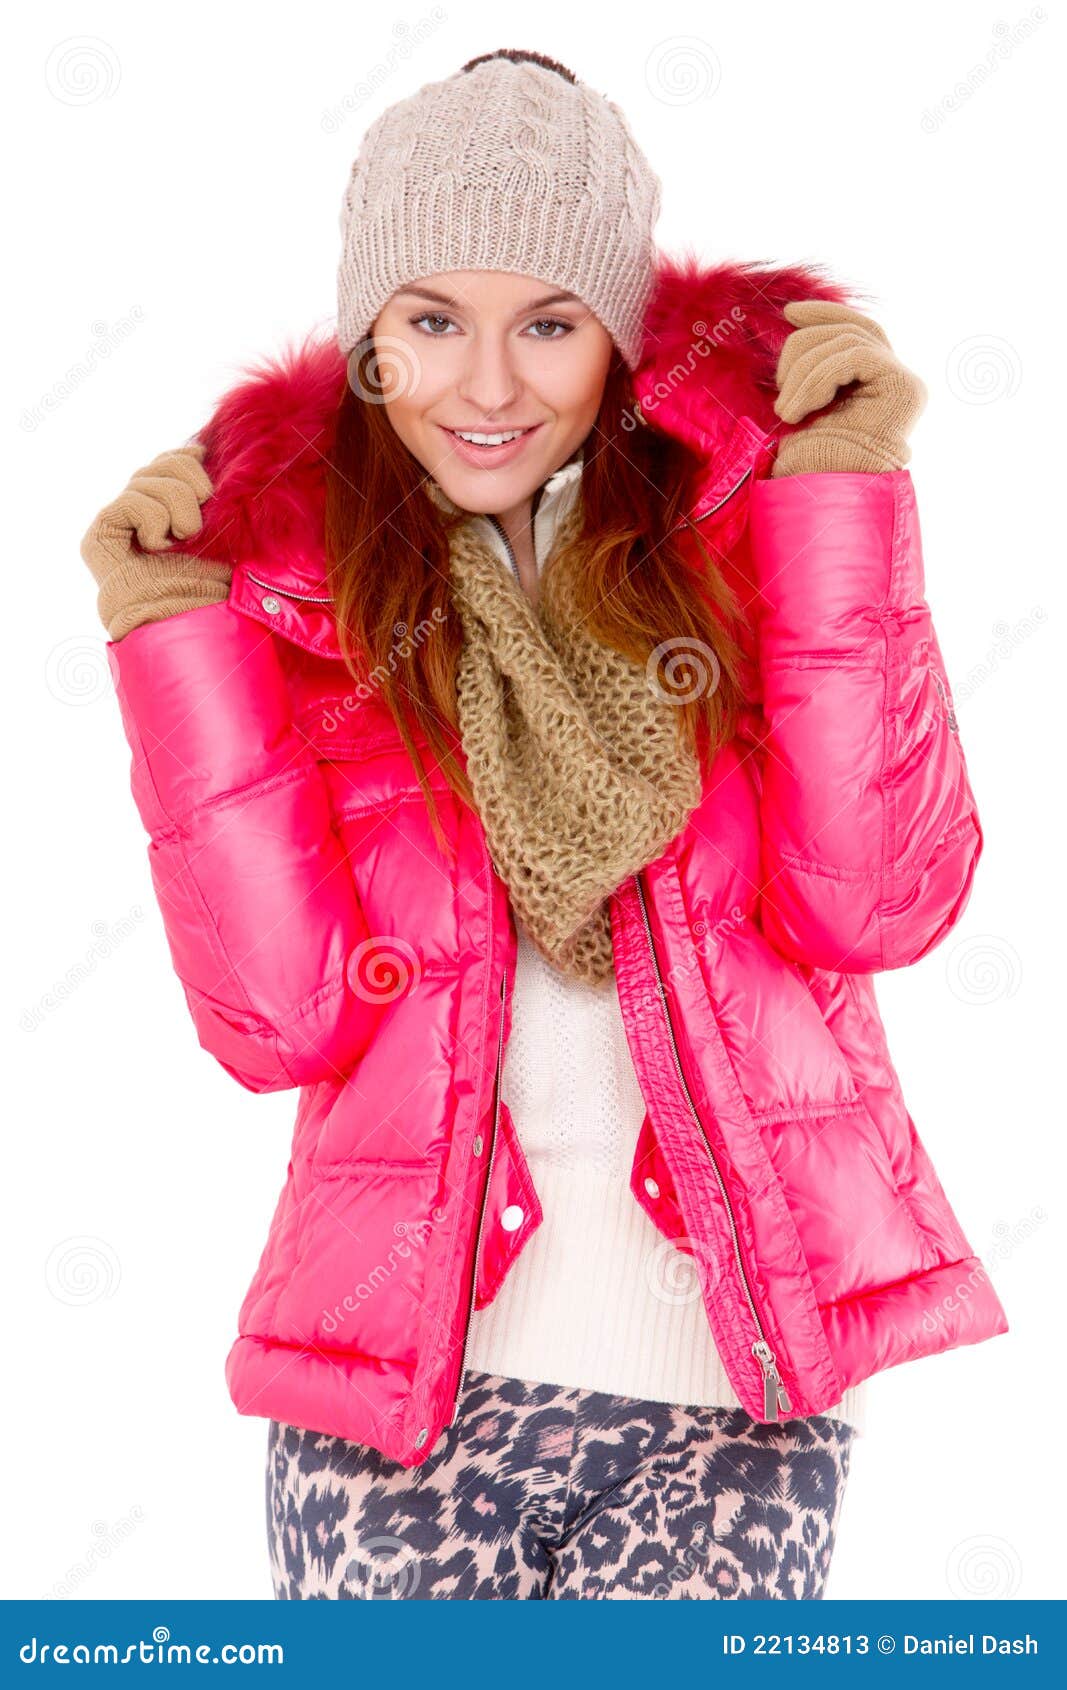 Young Woman Wearing Winter Jacket Scarf and Cap Stock Image - Image of ...